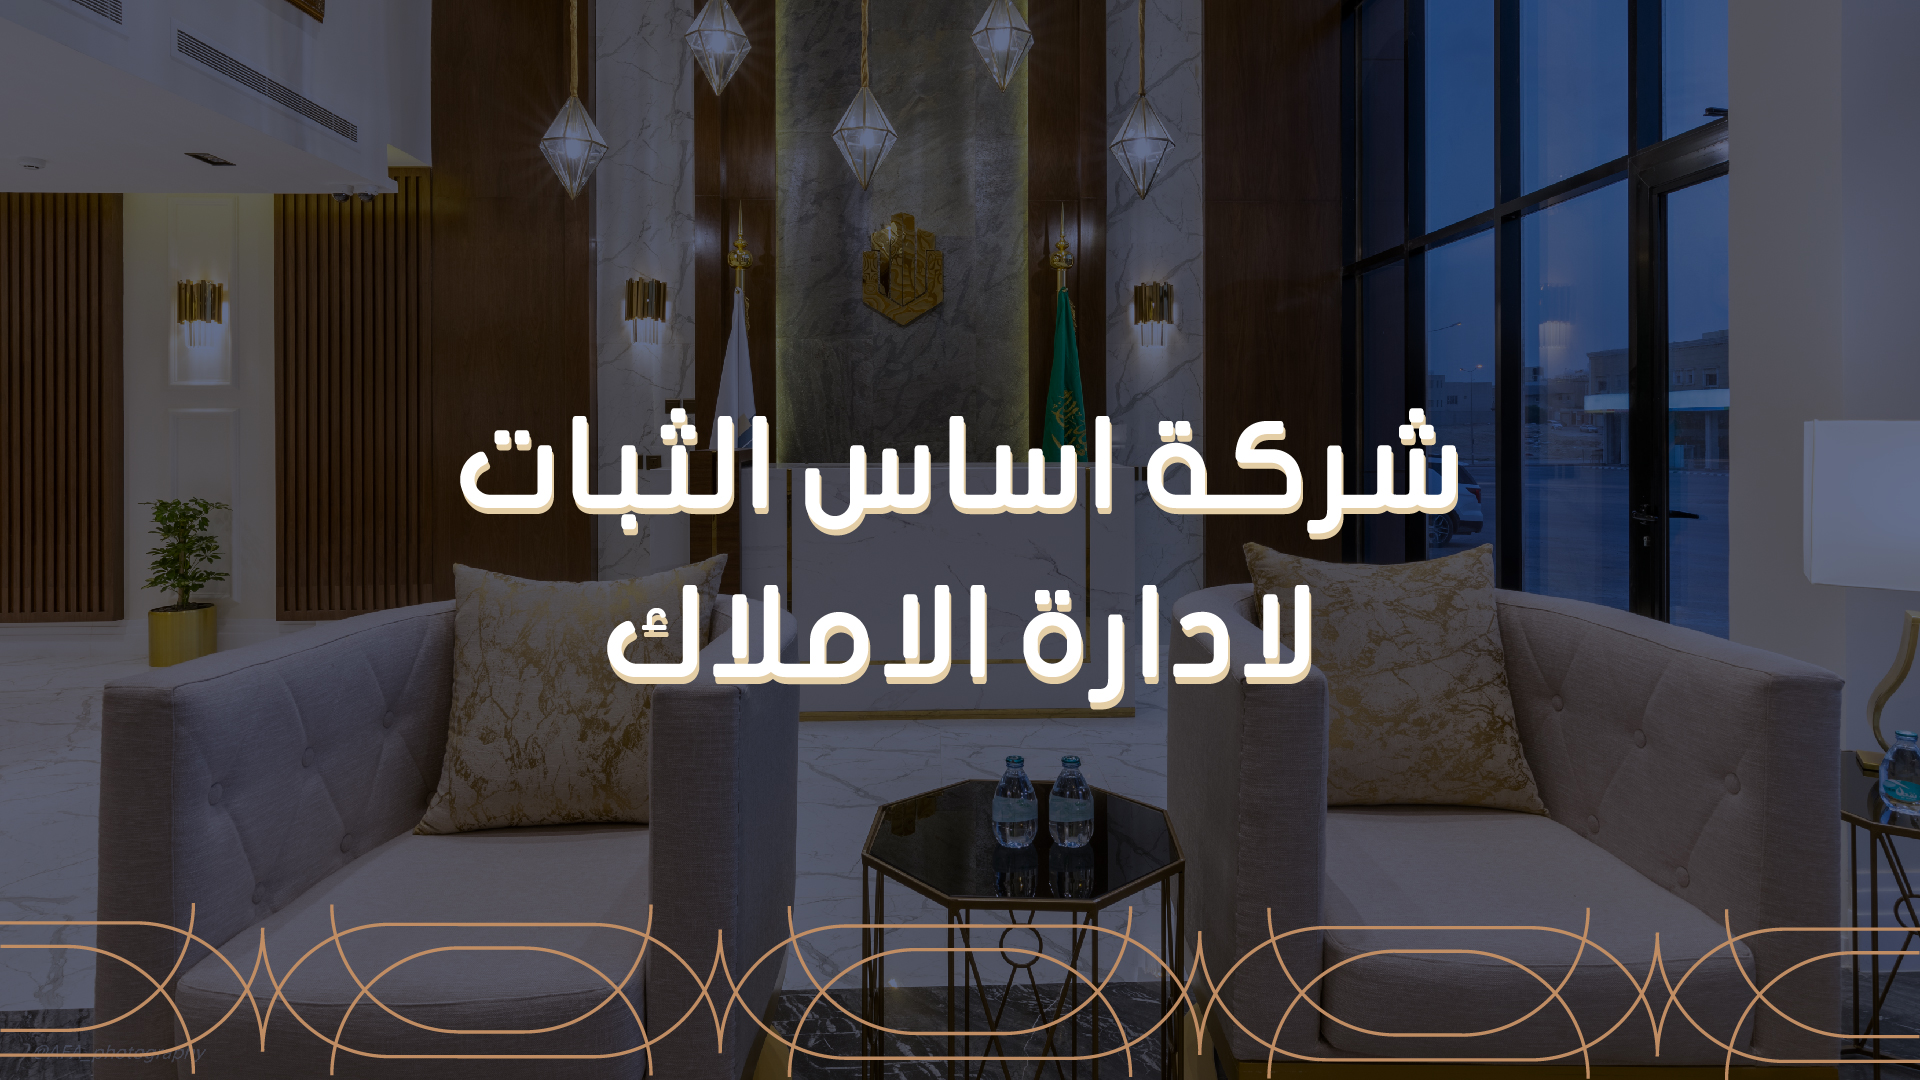 Asas AL thabat Exclusive marketer for Diaar projects